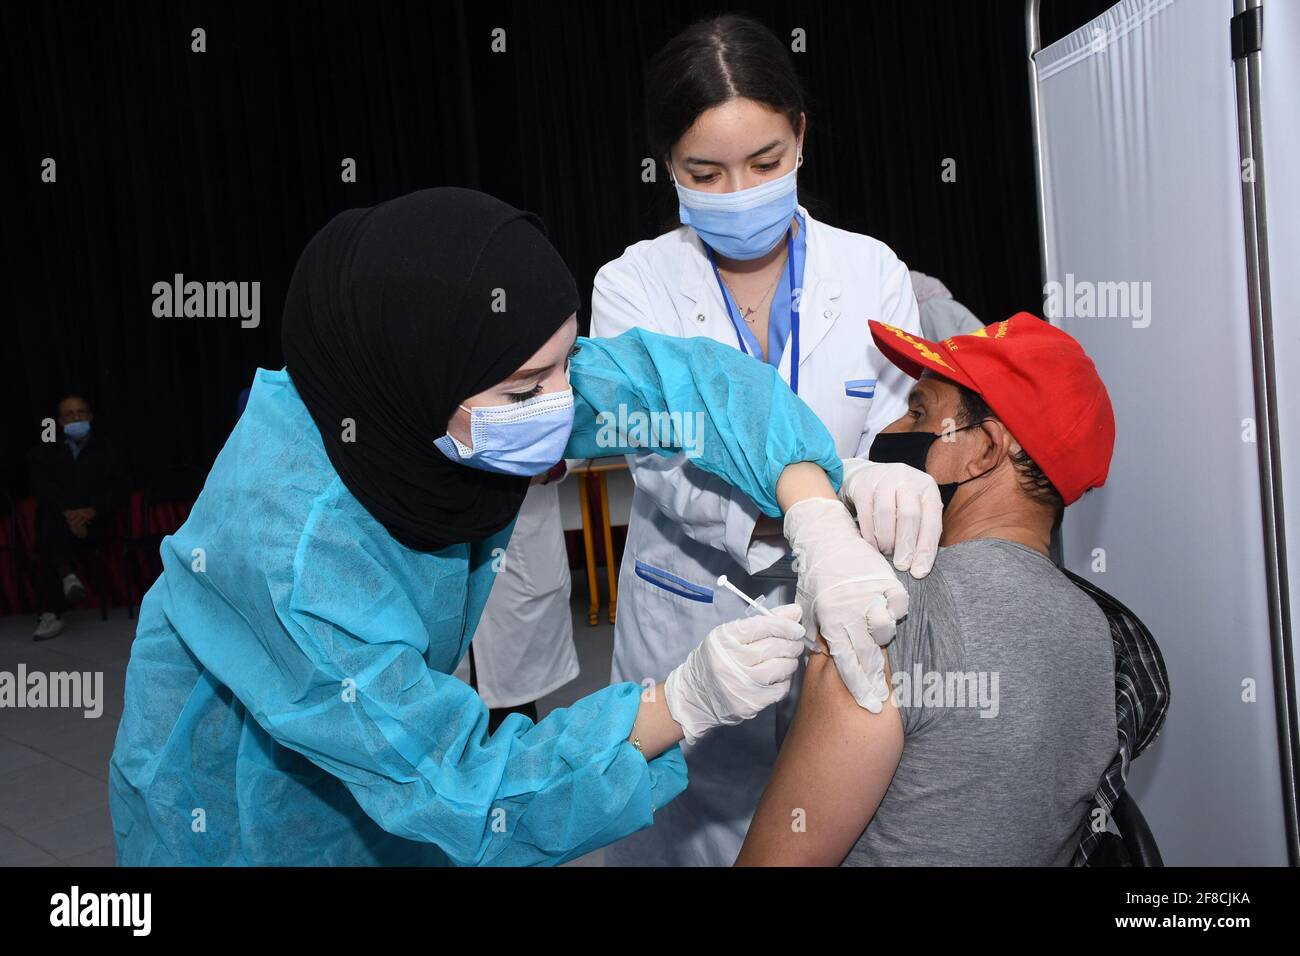 (210413) -- MOHAMMEDIA, April 13, 2021 (Xinhua) -- A medical worker administers a dose of China's Sinopharm COVID-19 vaccine to a resident in Mohammedia, Morocco, on April 13, 2021. Morocco's COVID-19 tally rose to 502,277 on Monday as 175 new cases were registered during the past 24 hours. (Photo by Chadi/Xinhua) Stock Photo